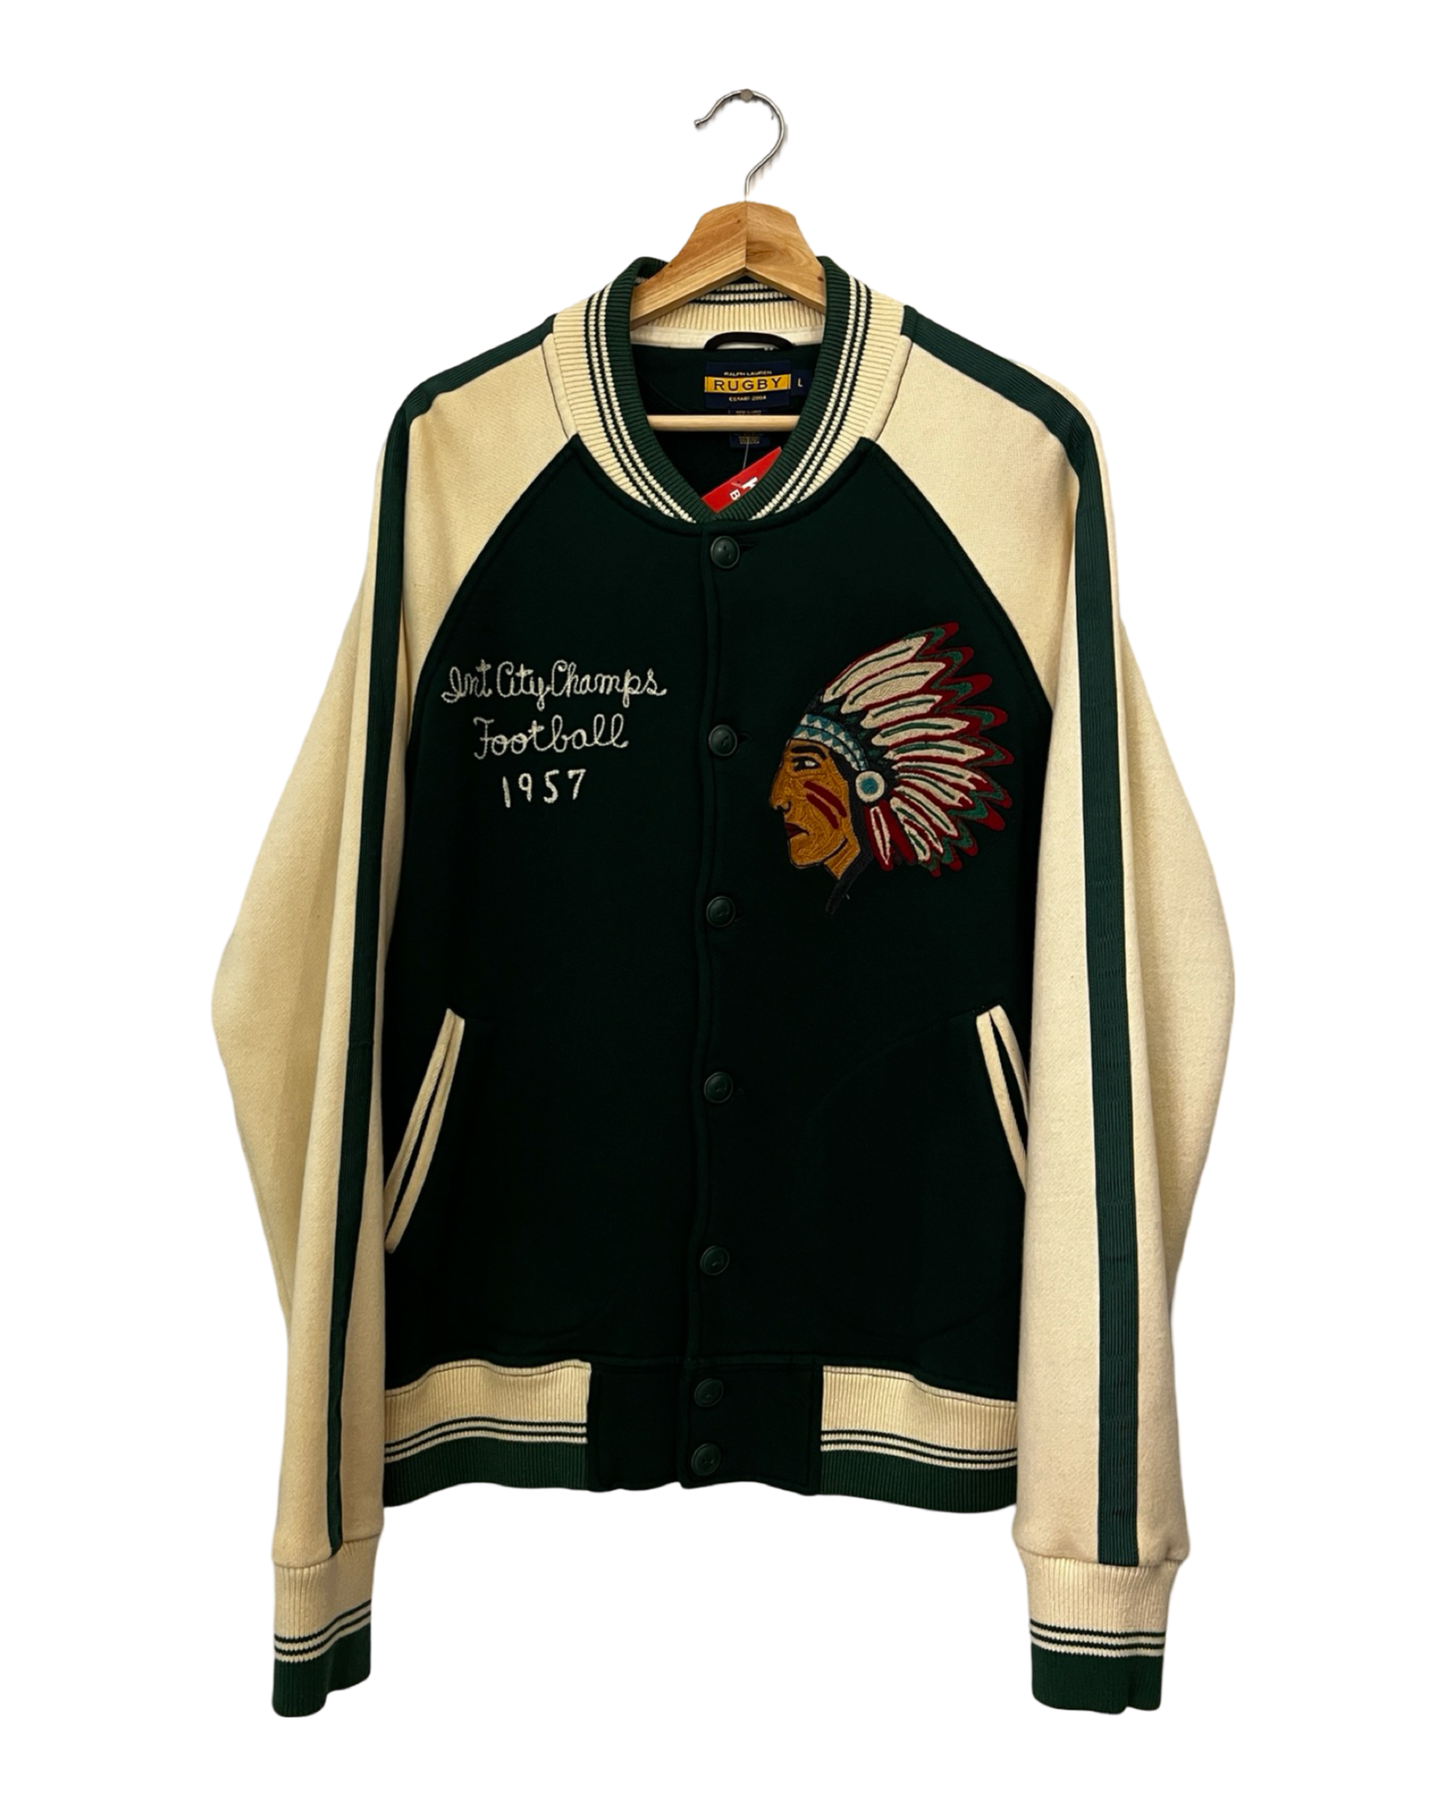 Archive Ralph Lauren Rugby 1957 Champs Varsity Polo Jacket